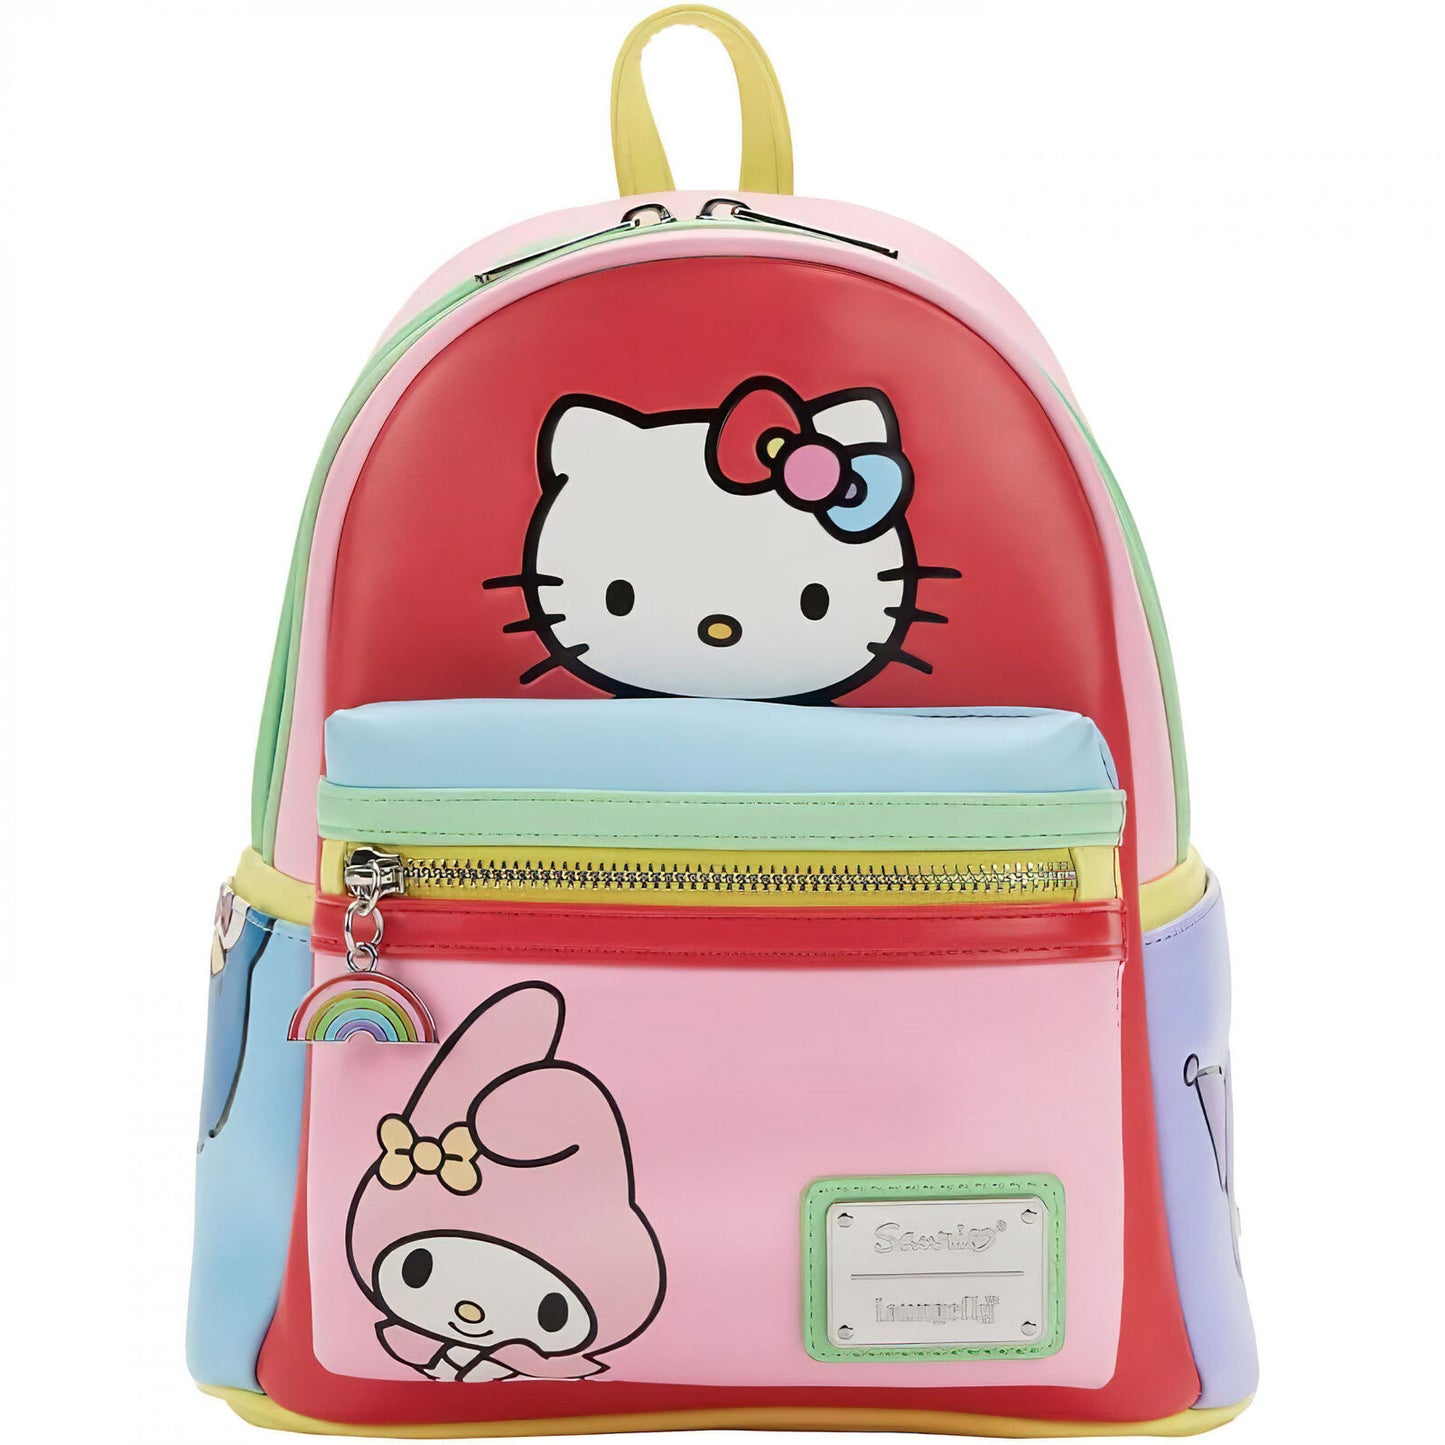 Sanrio: Hello Kitty and Friends Color Block Mini Backpack by Loungefly